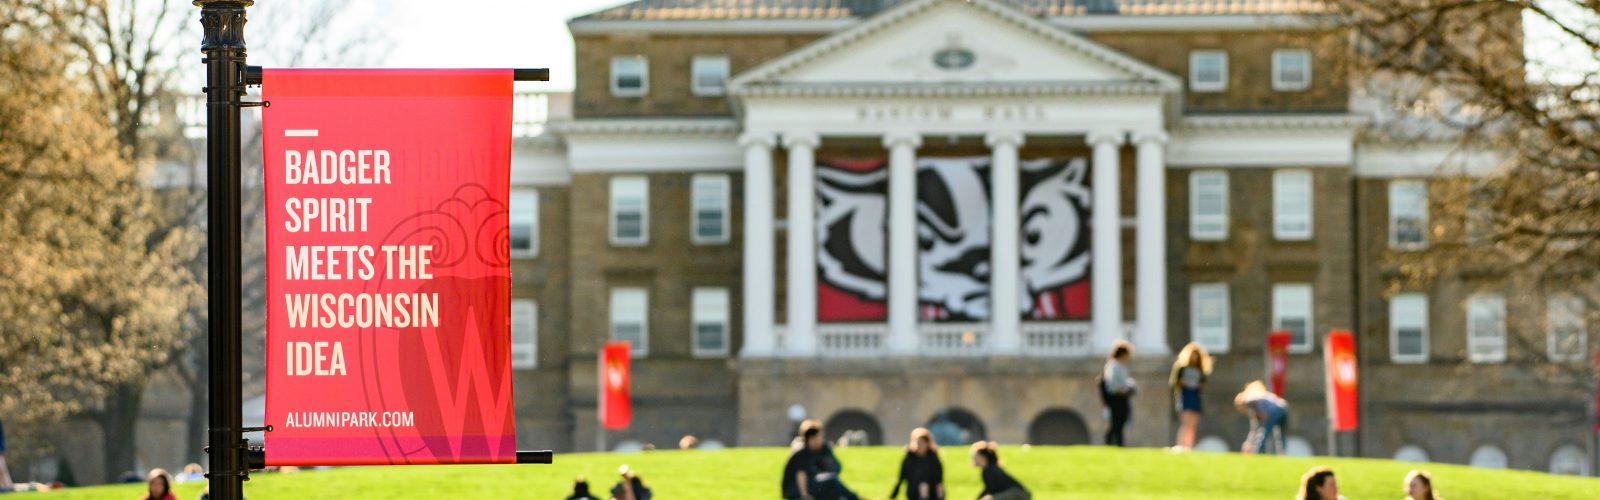 Students enjoy a warm spring day on Bascom Hill at the University of Wisconsin-Madison